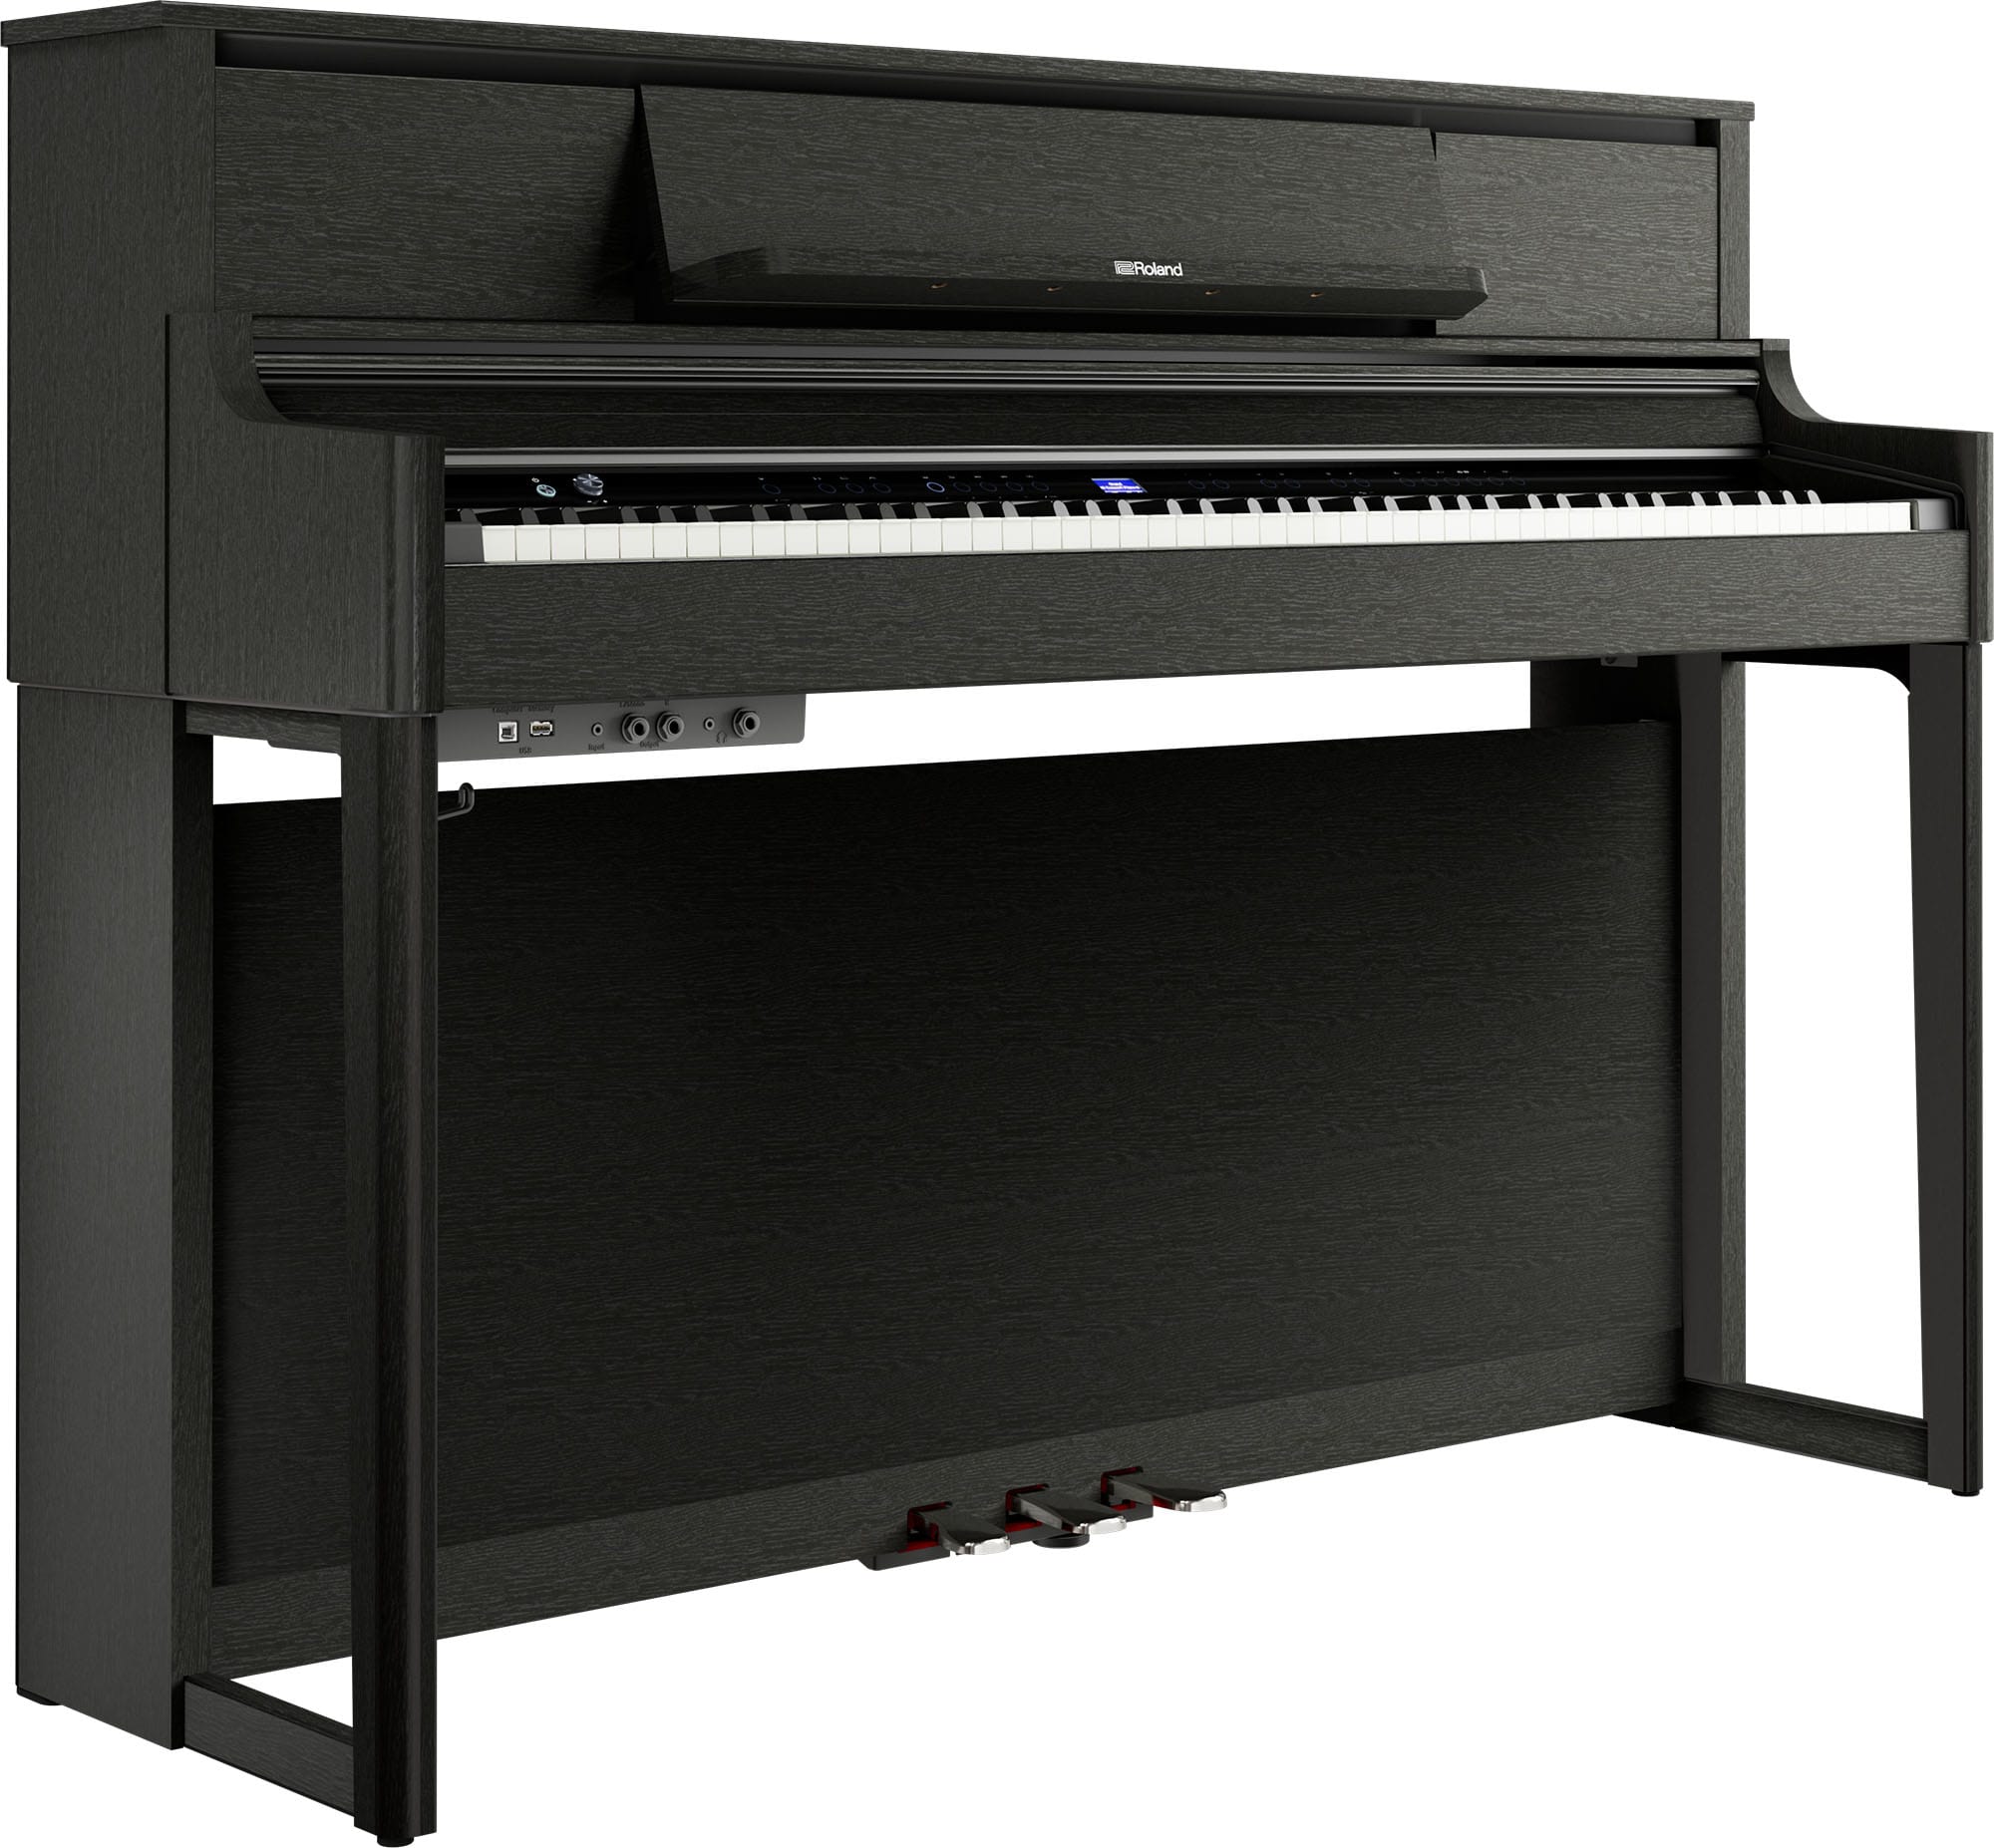 Roland Lx-5-ch - Charcoal Black - Piano digital con mueble - Variation 1